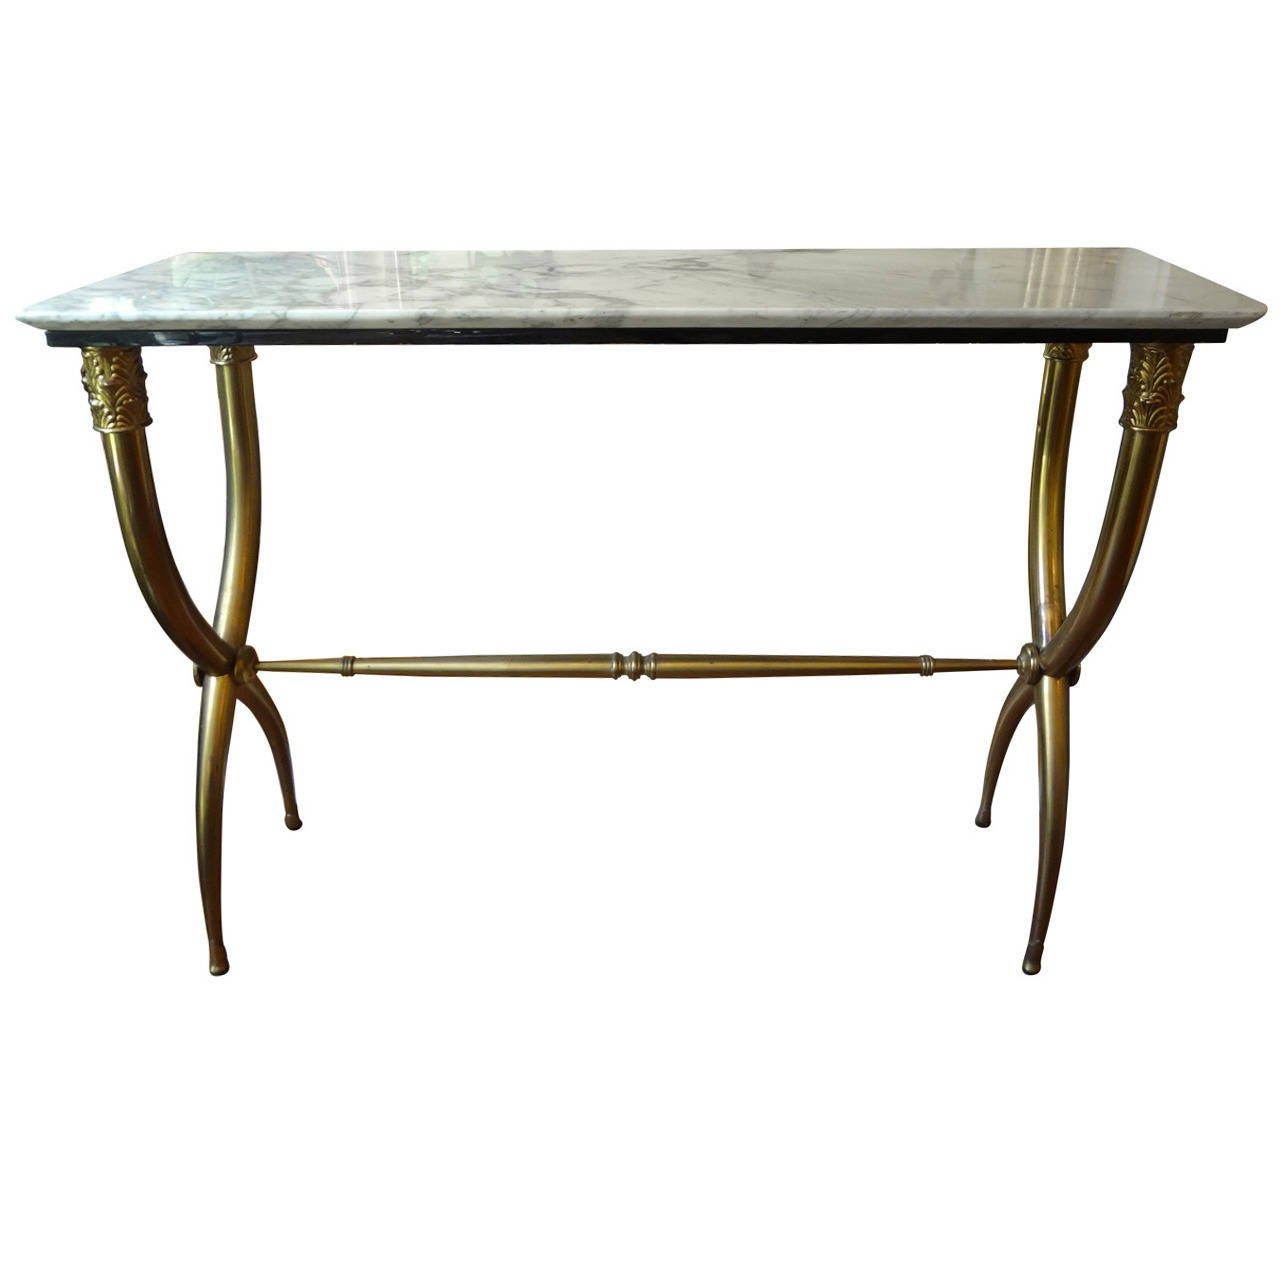 Italian Gio Ponti Style Brass Or Bronze Console Table At With Regard To Bronze Metal Rectangular Console Tables (View 4 of 20)